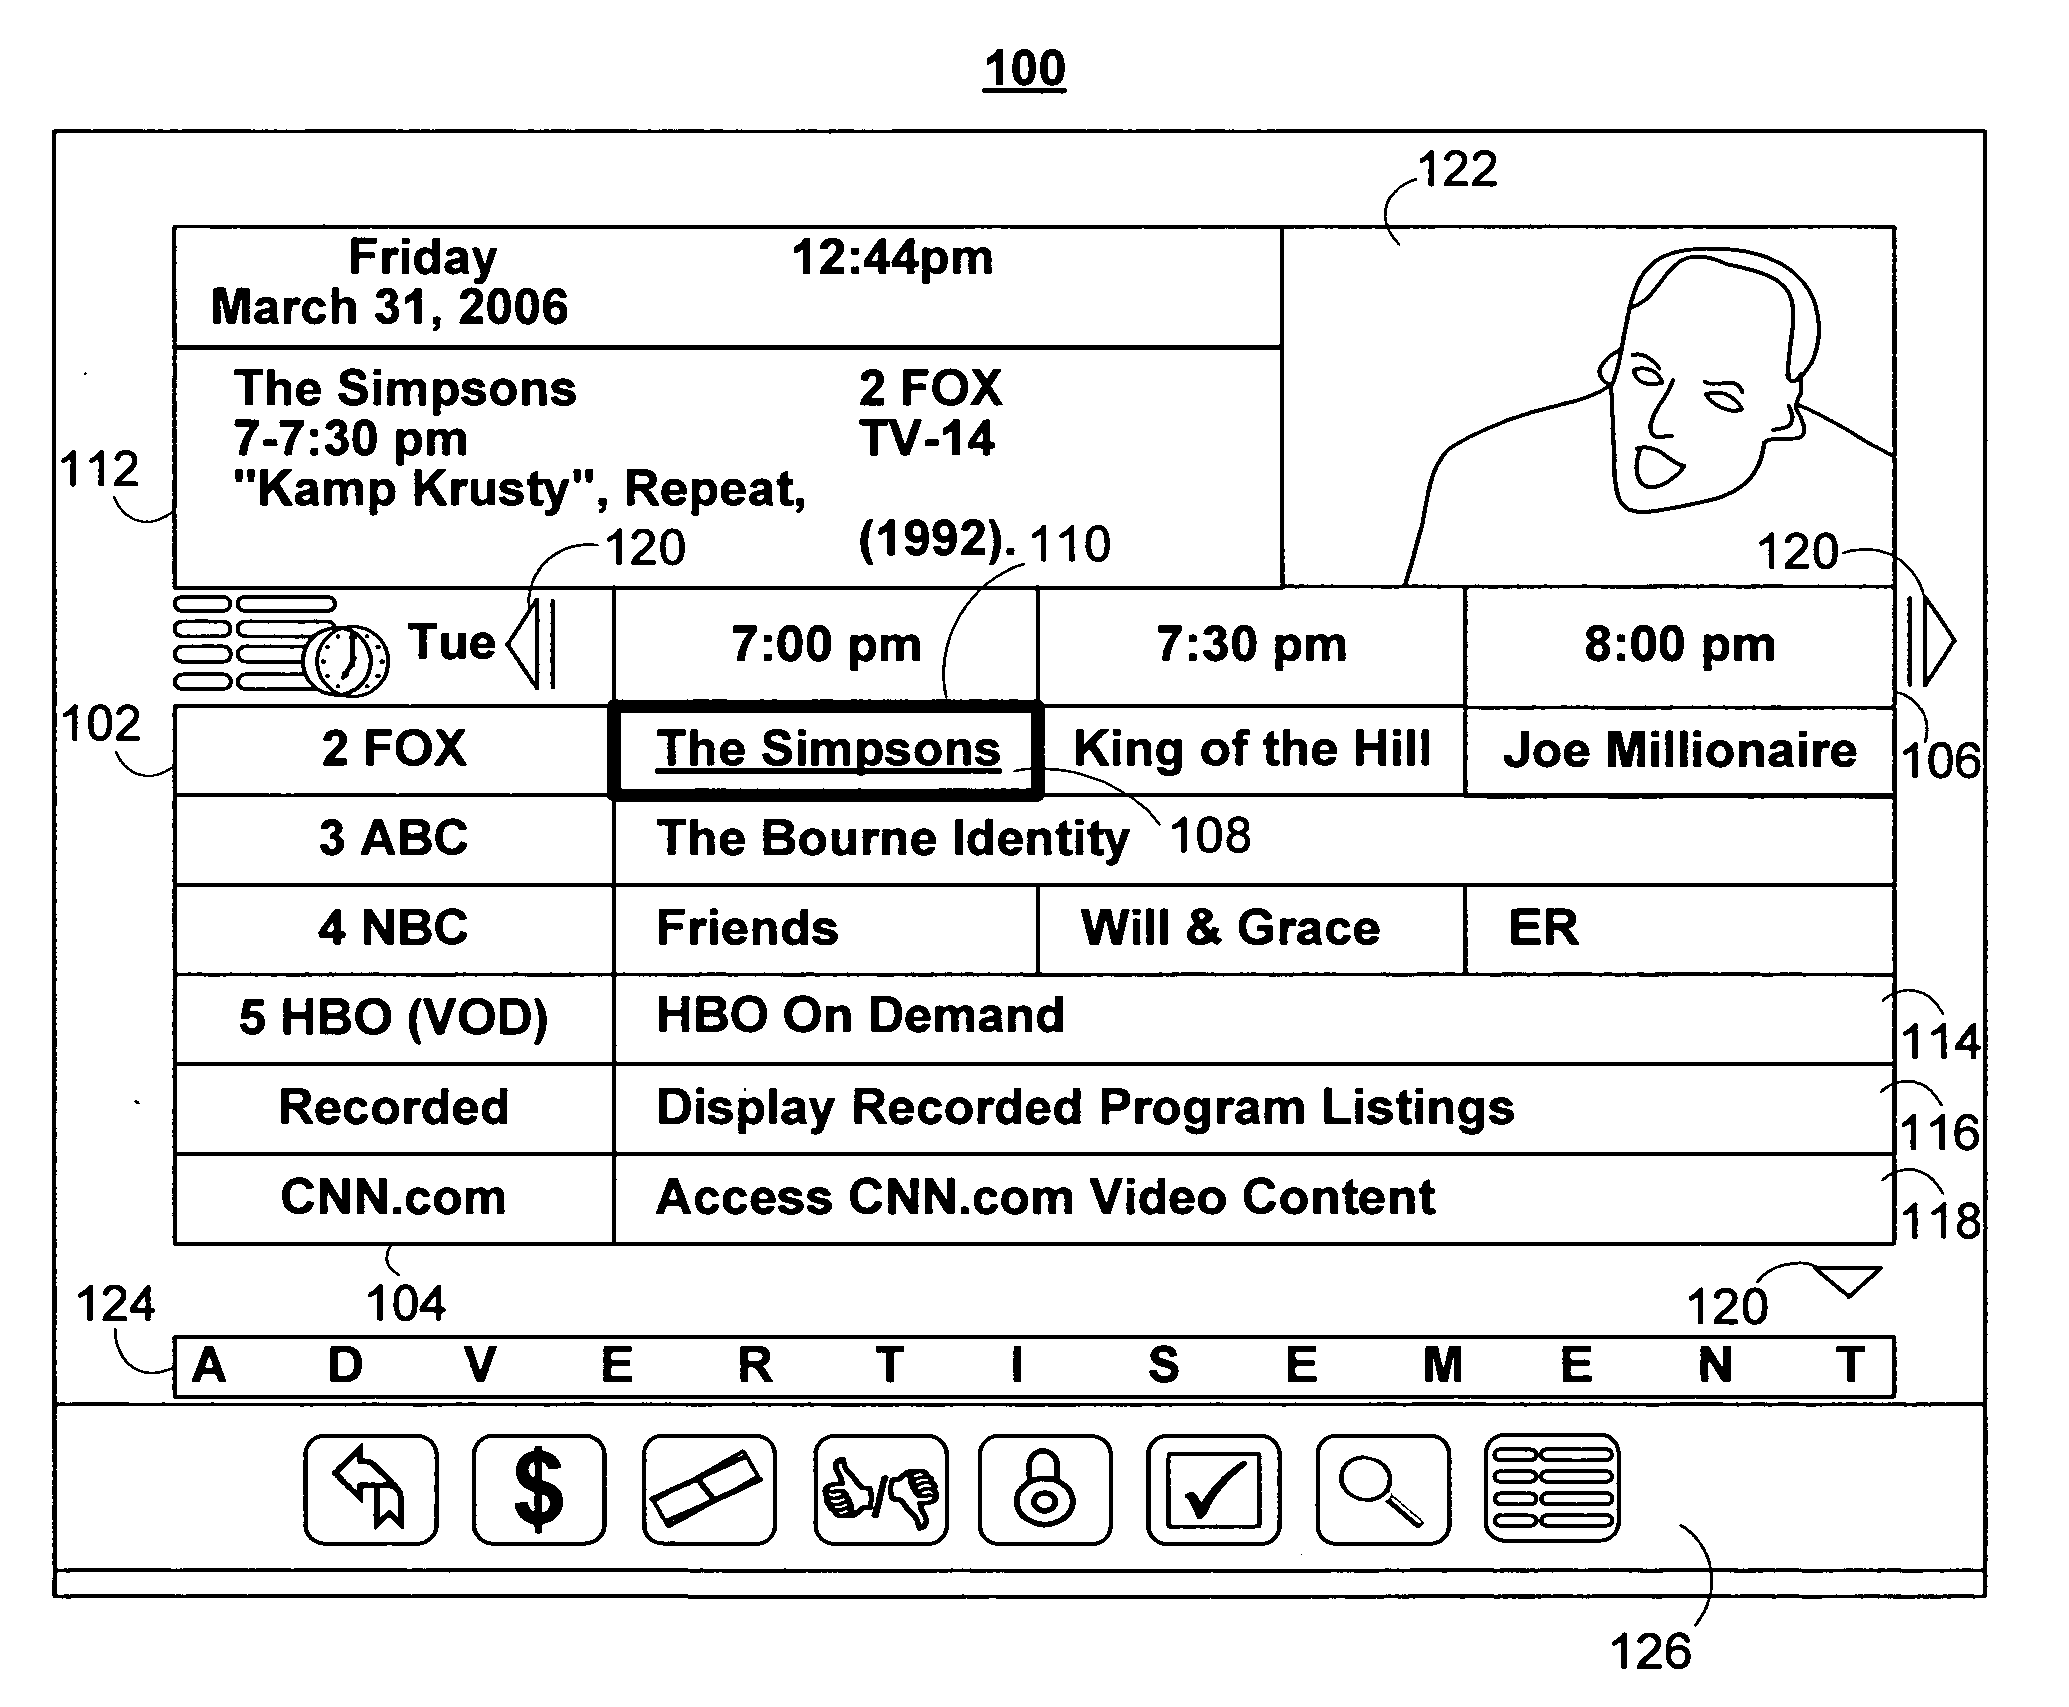 Systems and methods for mirroring and transcoding media content